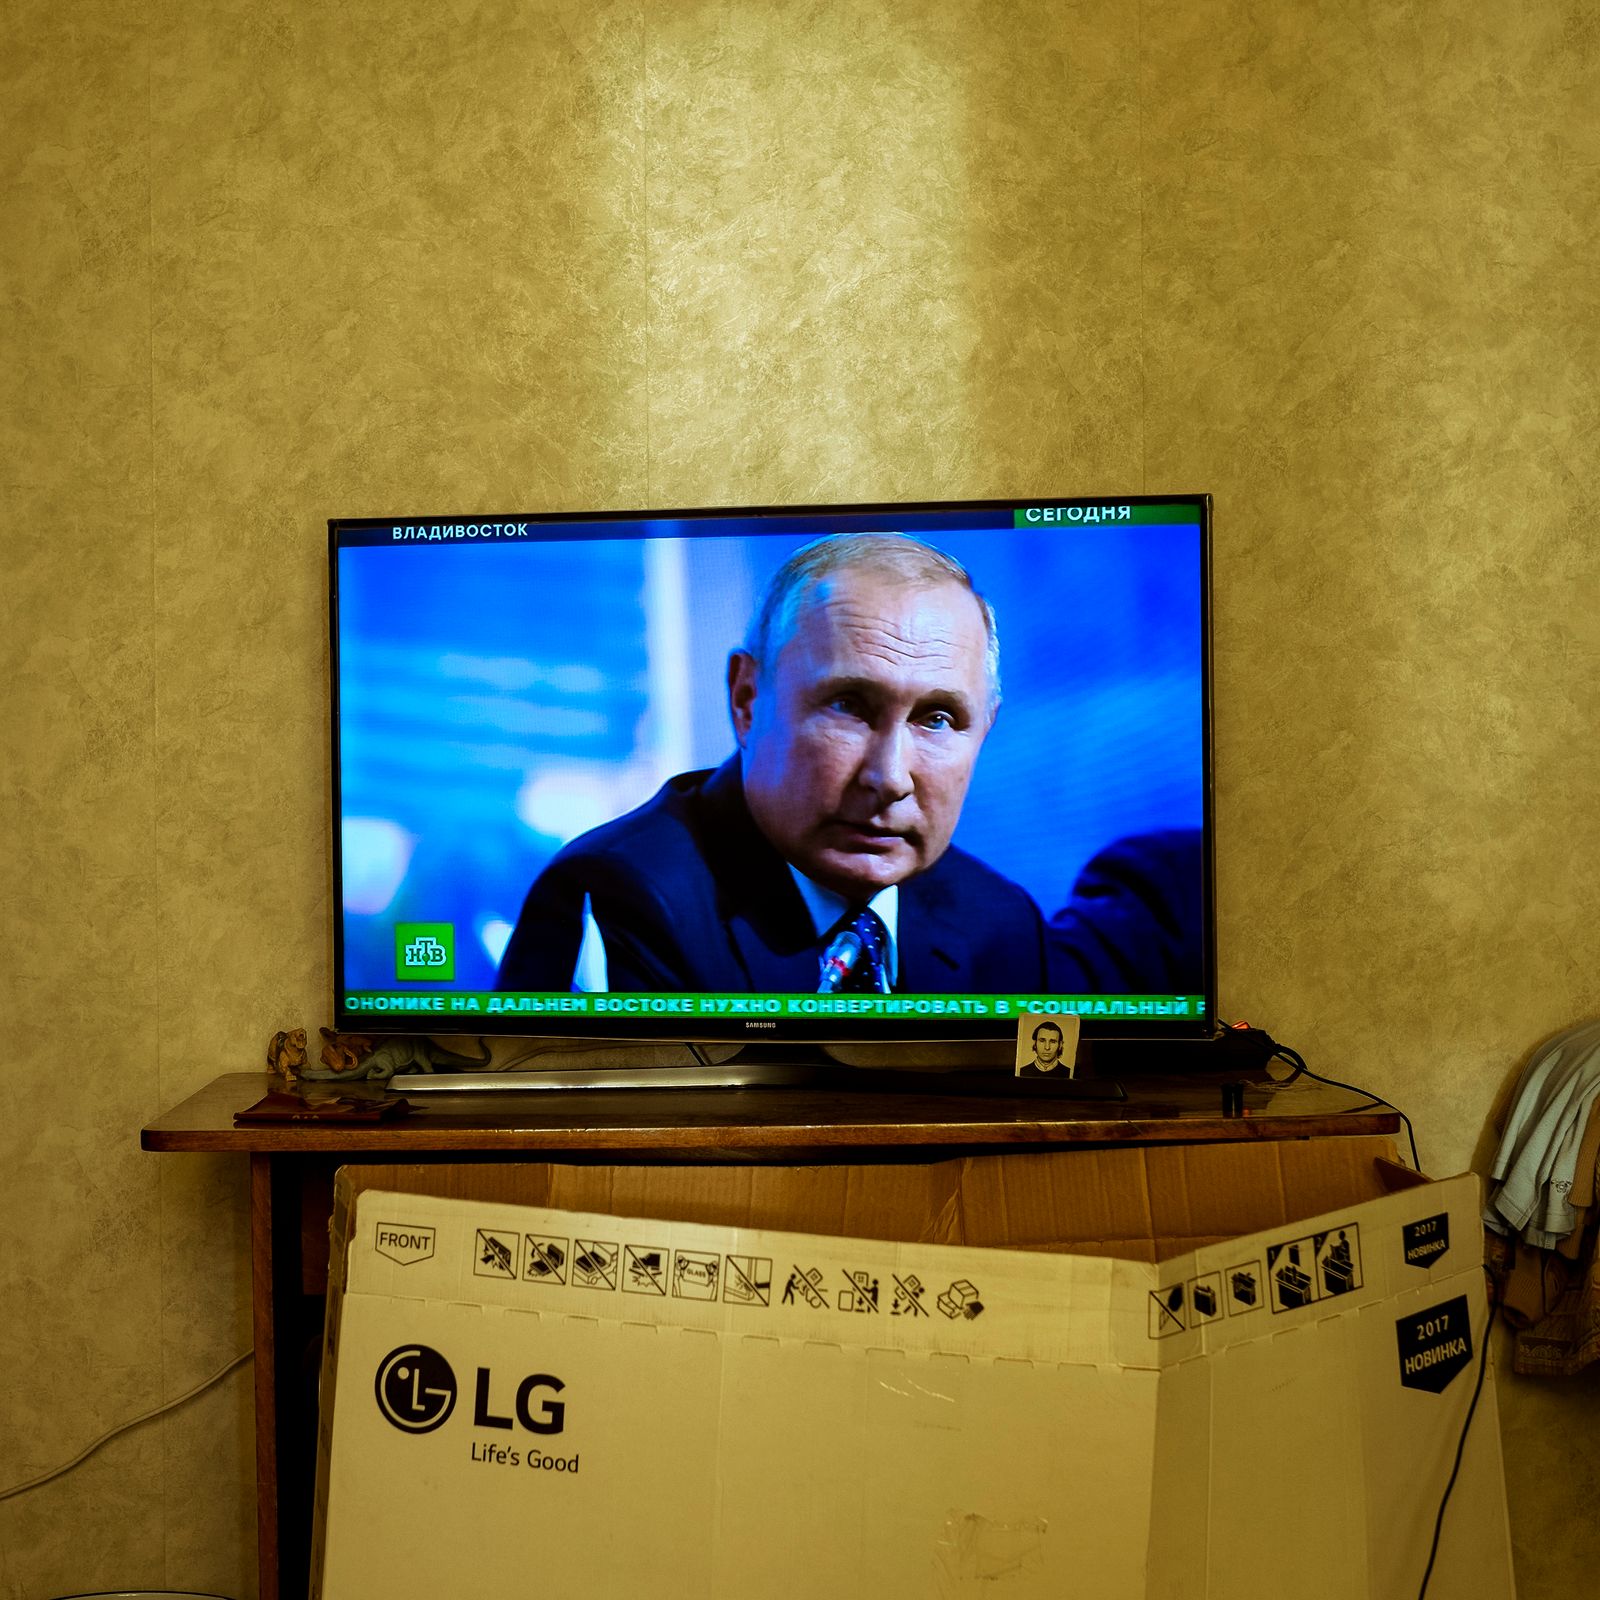 © Maria Quigley - Vladimir Putin on the television screen in Babushka's bedroom. An LG 'Life's Good' TV box leans against the cabinet.